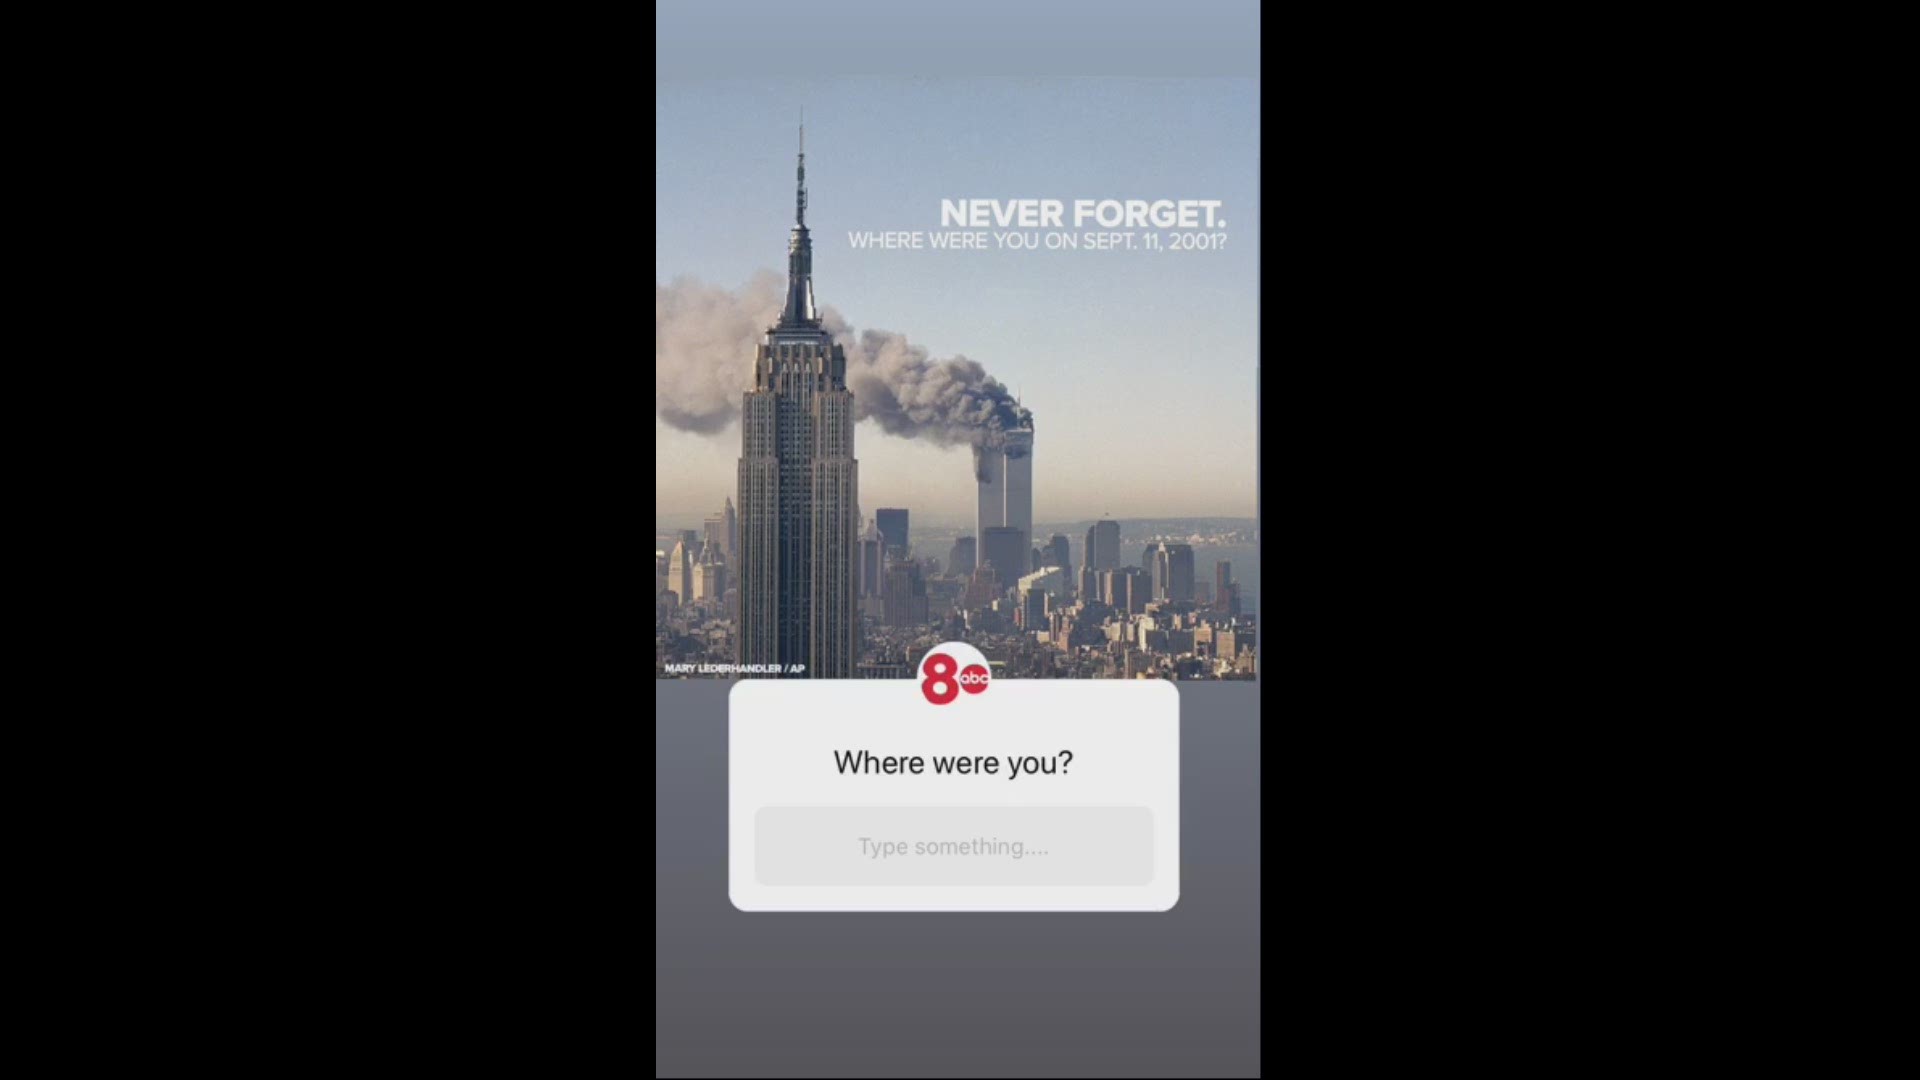 Memories from 9/11 - where were you when you found out?